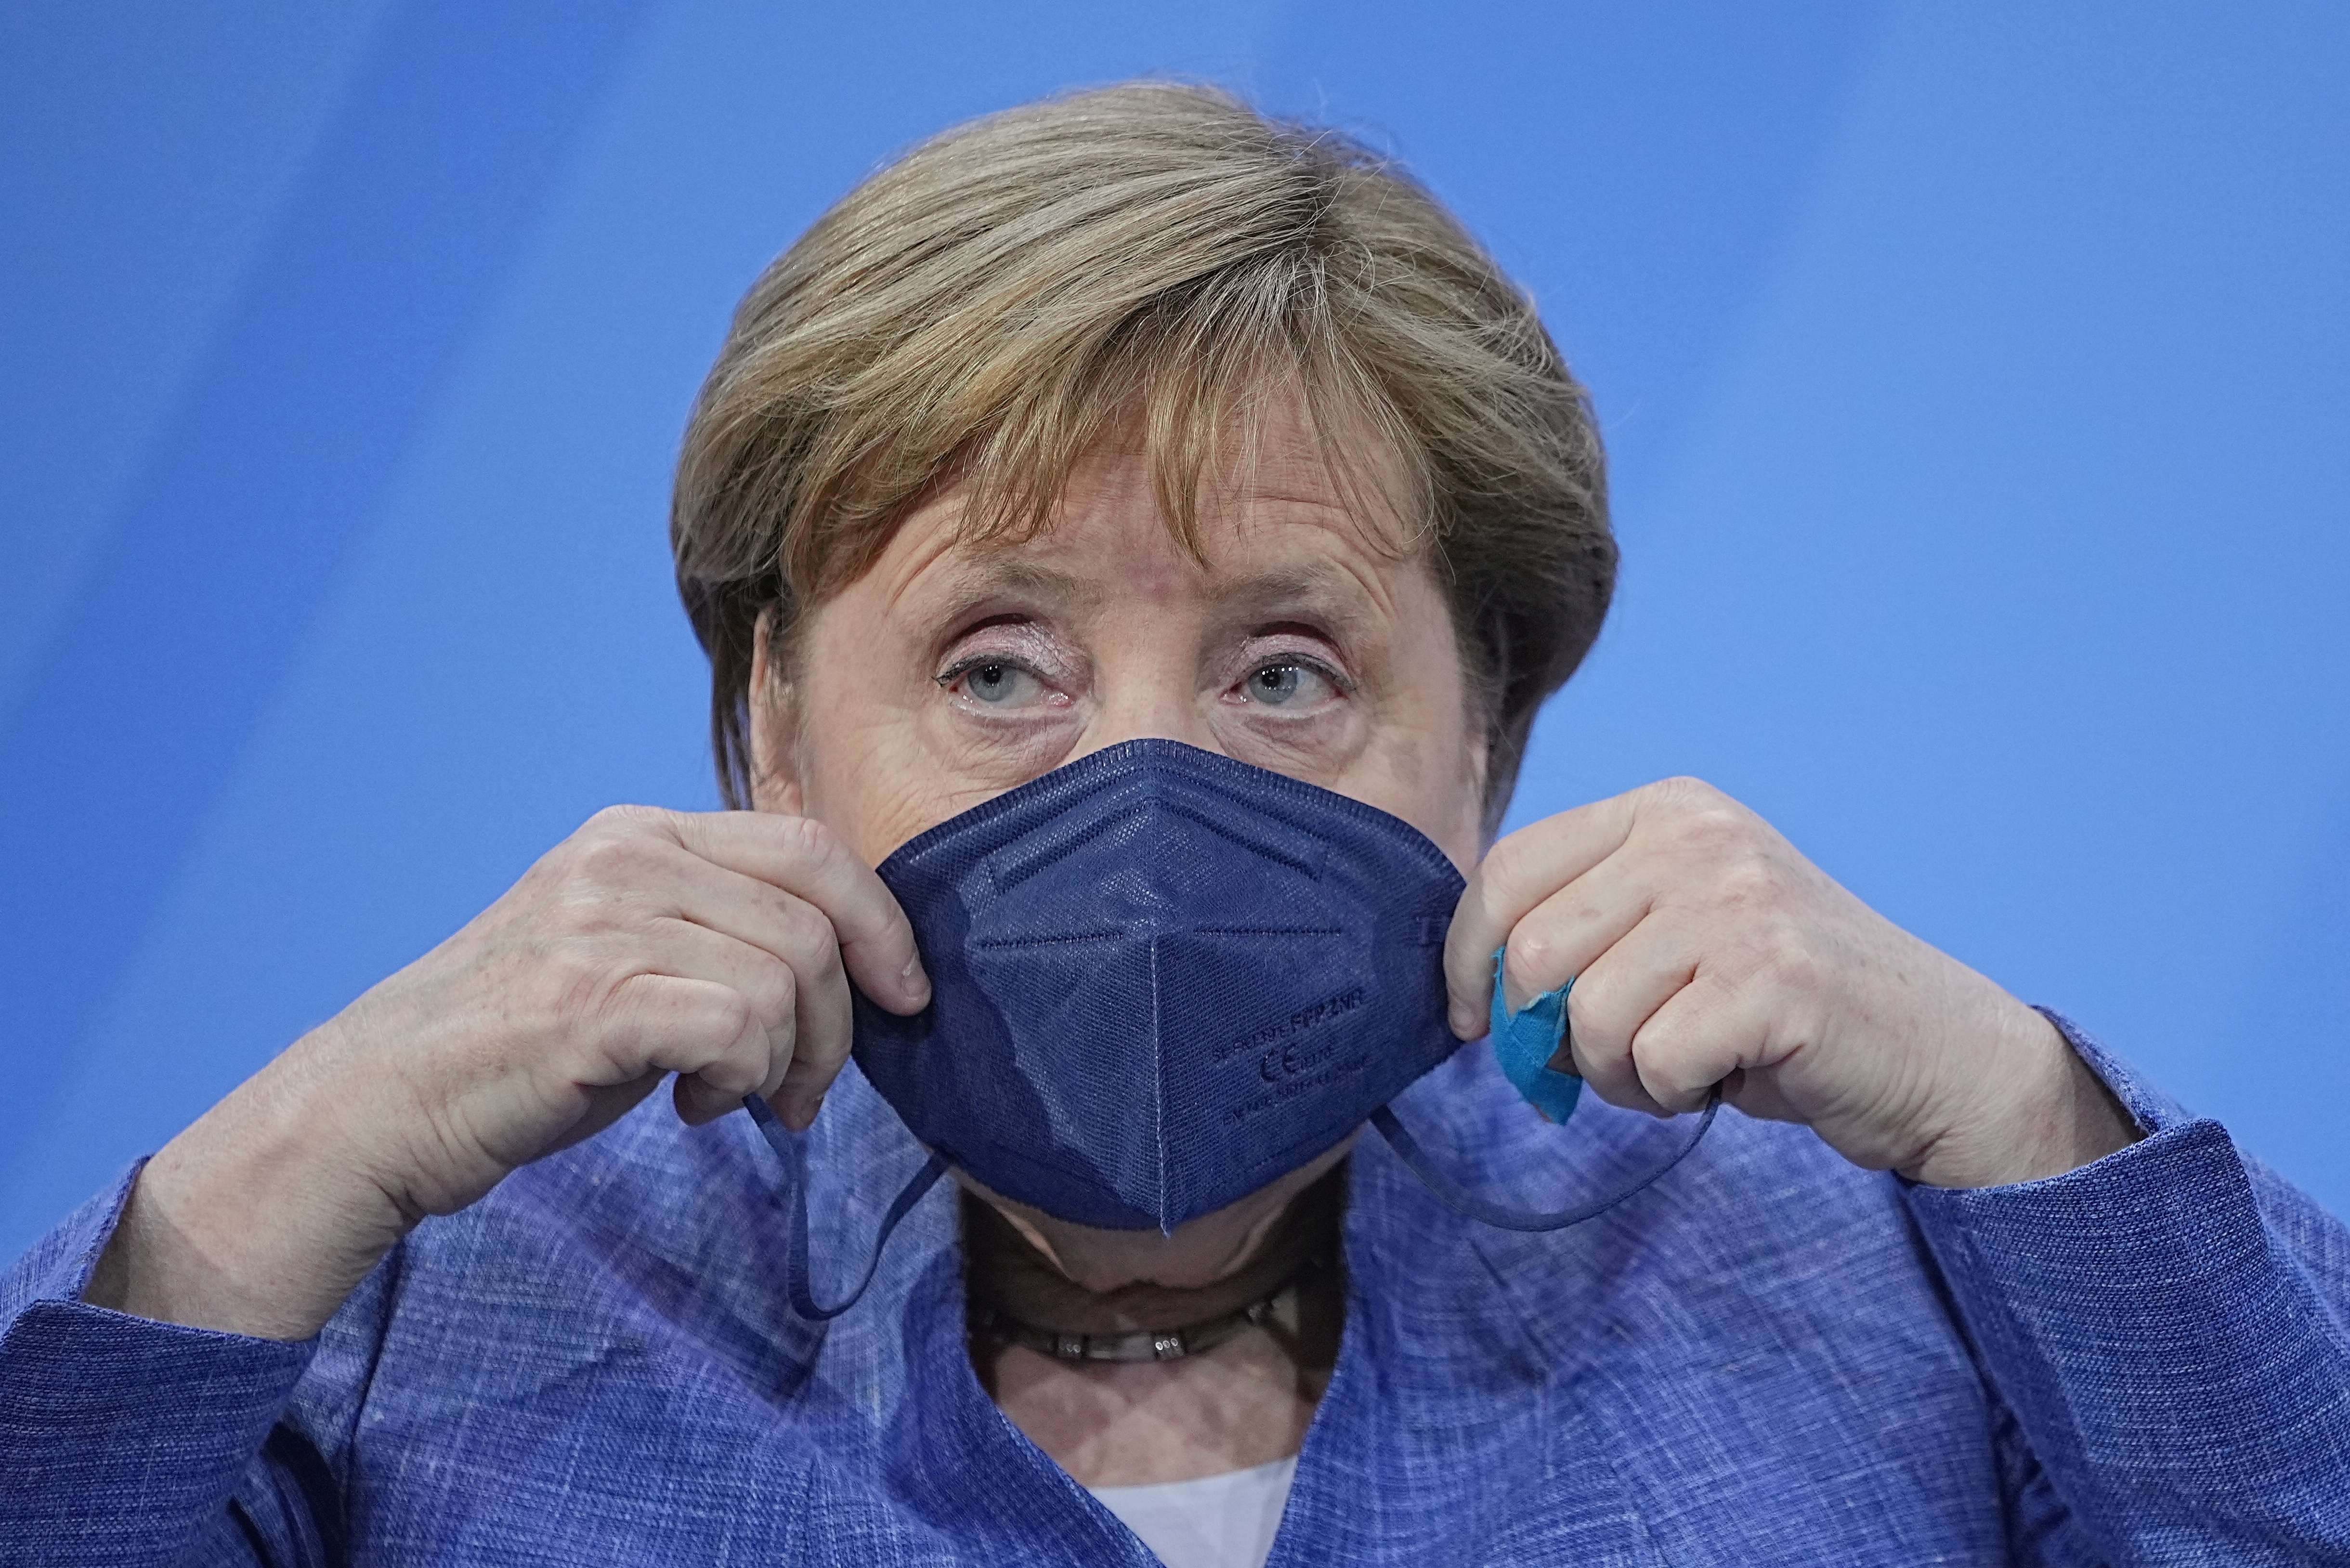 German Chancellor Angela Merkel wears her protective mask after a press conference following a meeting with the leaders of the country's 16 federal states to discuss COVID-19 polls in Berlin, Germany, June 10, 2021. Michael Kappeler / Pool via REUTERS